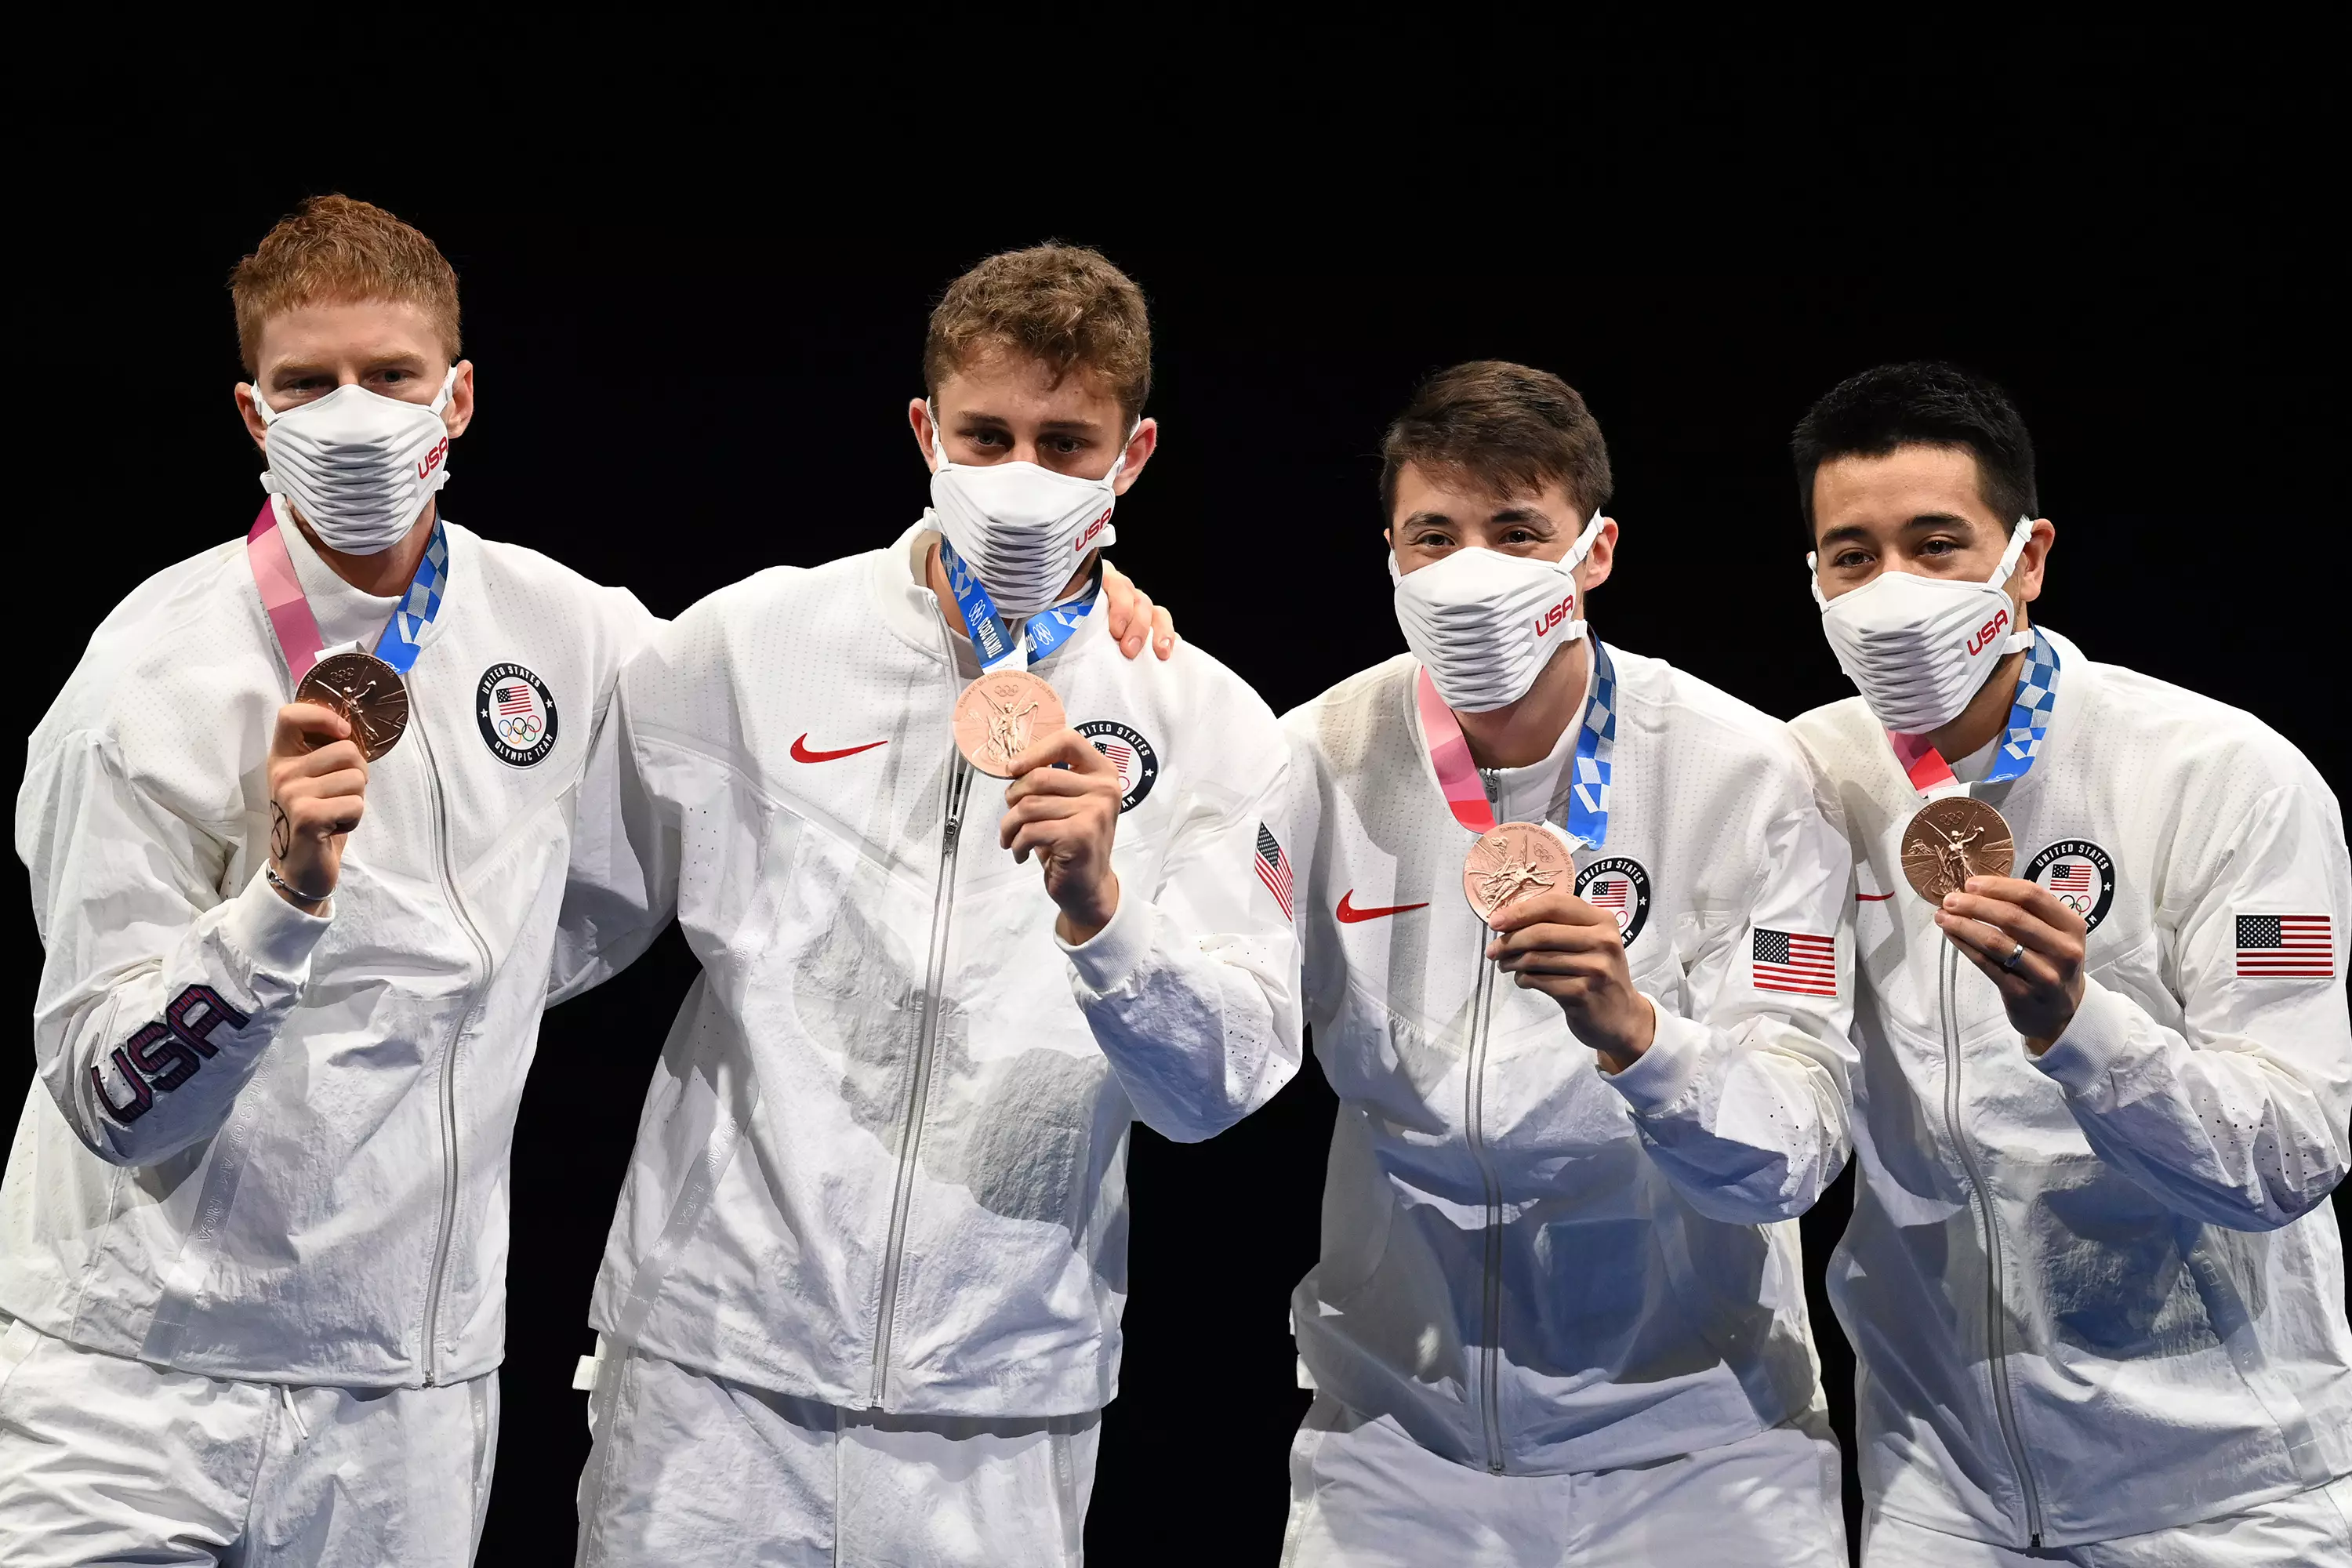 Members of Team USA pose with the bronze medals during the awarding ceremony for the fencing men's foil team event at Tokyo 2020 Olympic Games. (